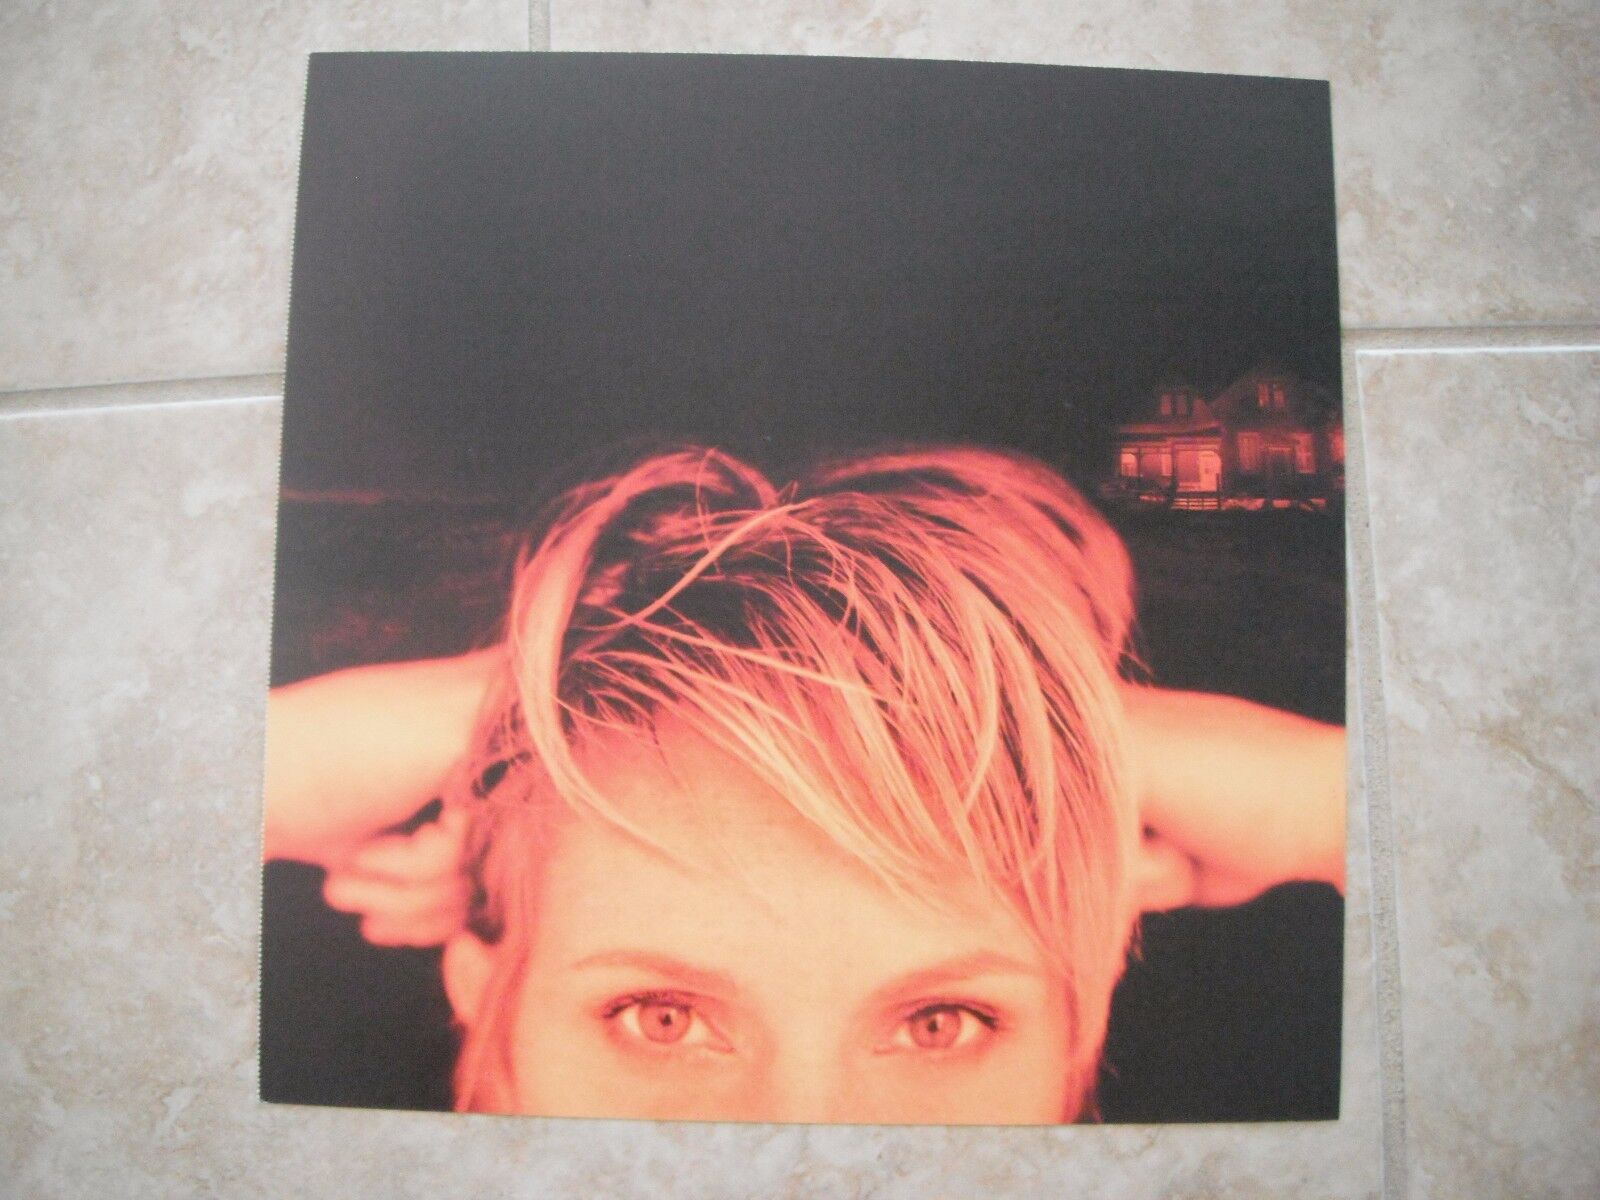 Shawn Colvin Get Out of This House Promo LP Photo Poster painting Flat 12x12 Poster Double Sided